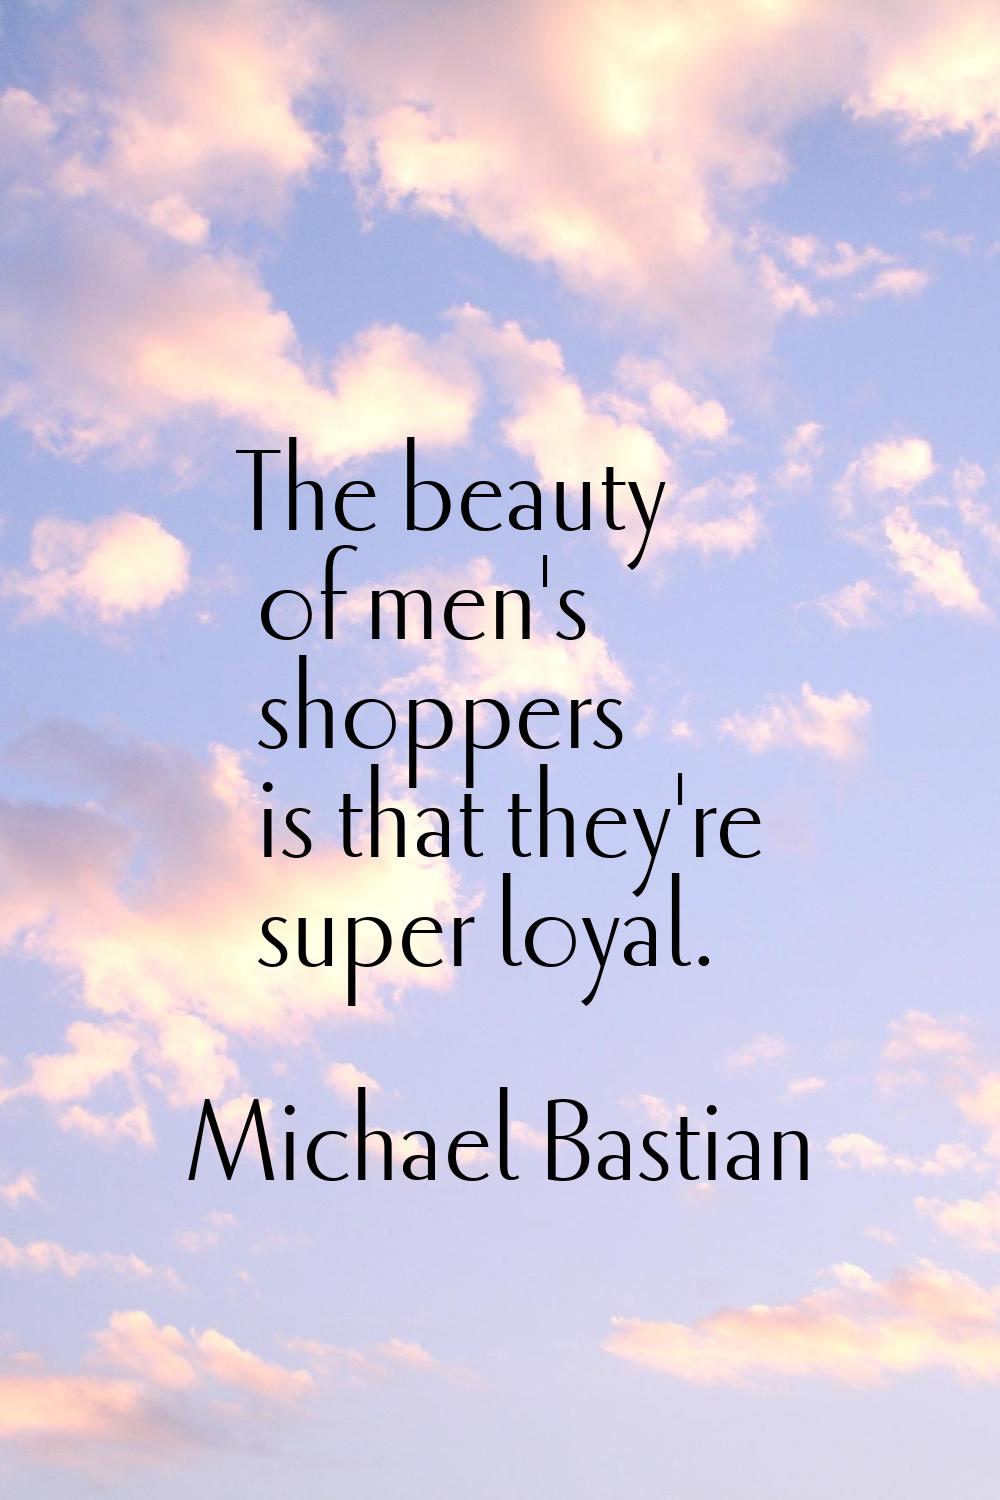 The beauty of men's shoppers is that they're super loyal.